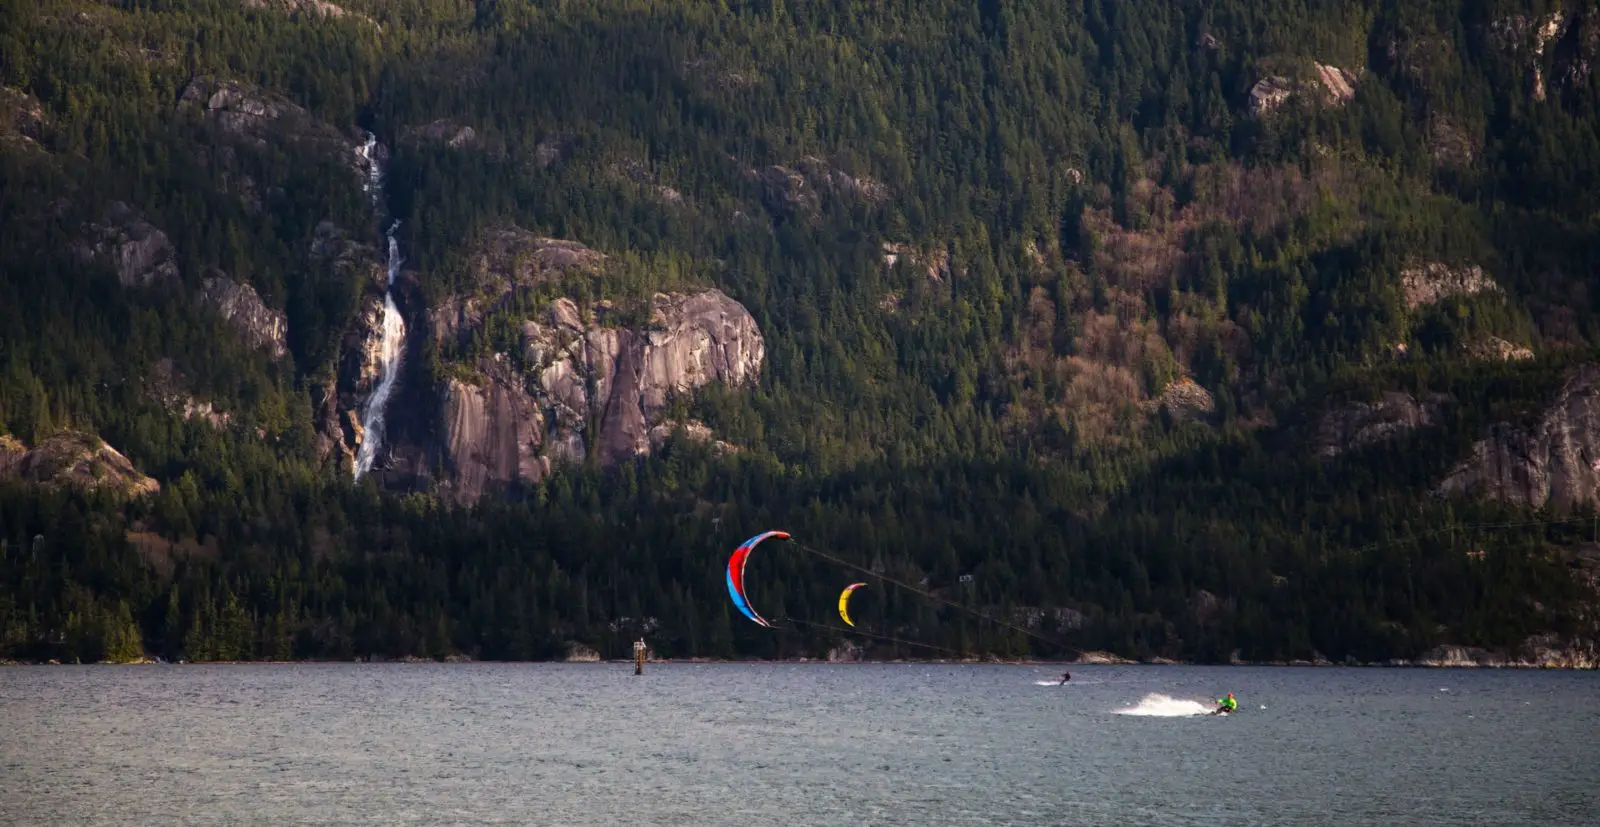 Kitesurfing is one of the best outdoor things to do in the summer in Squamish